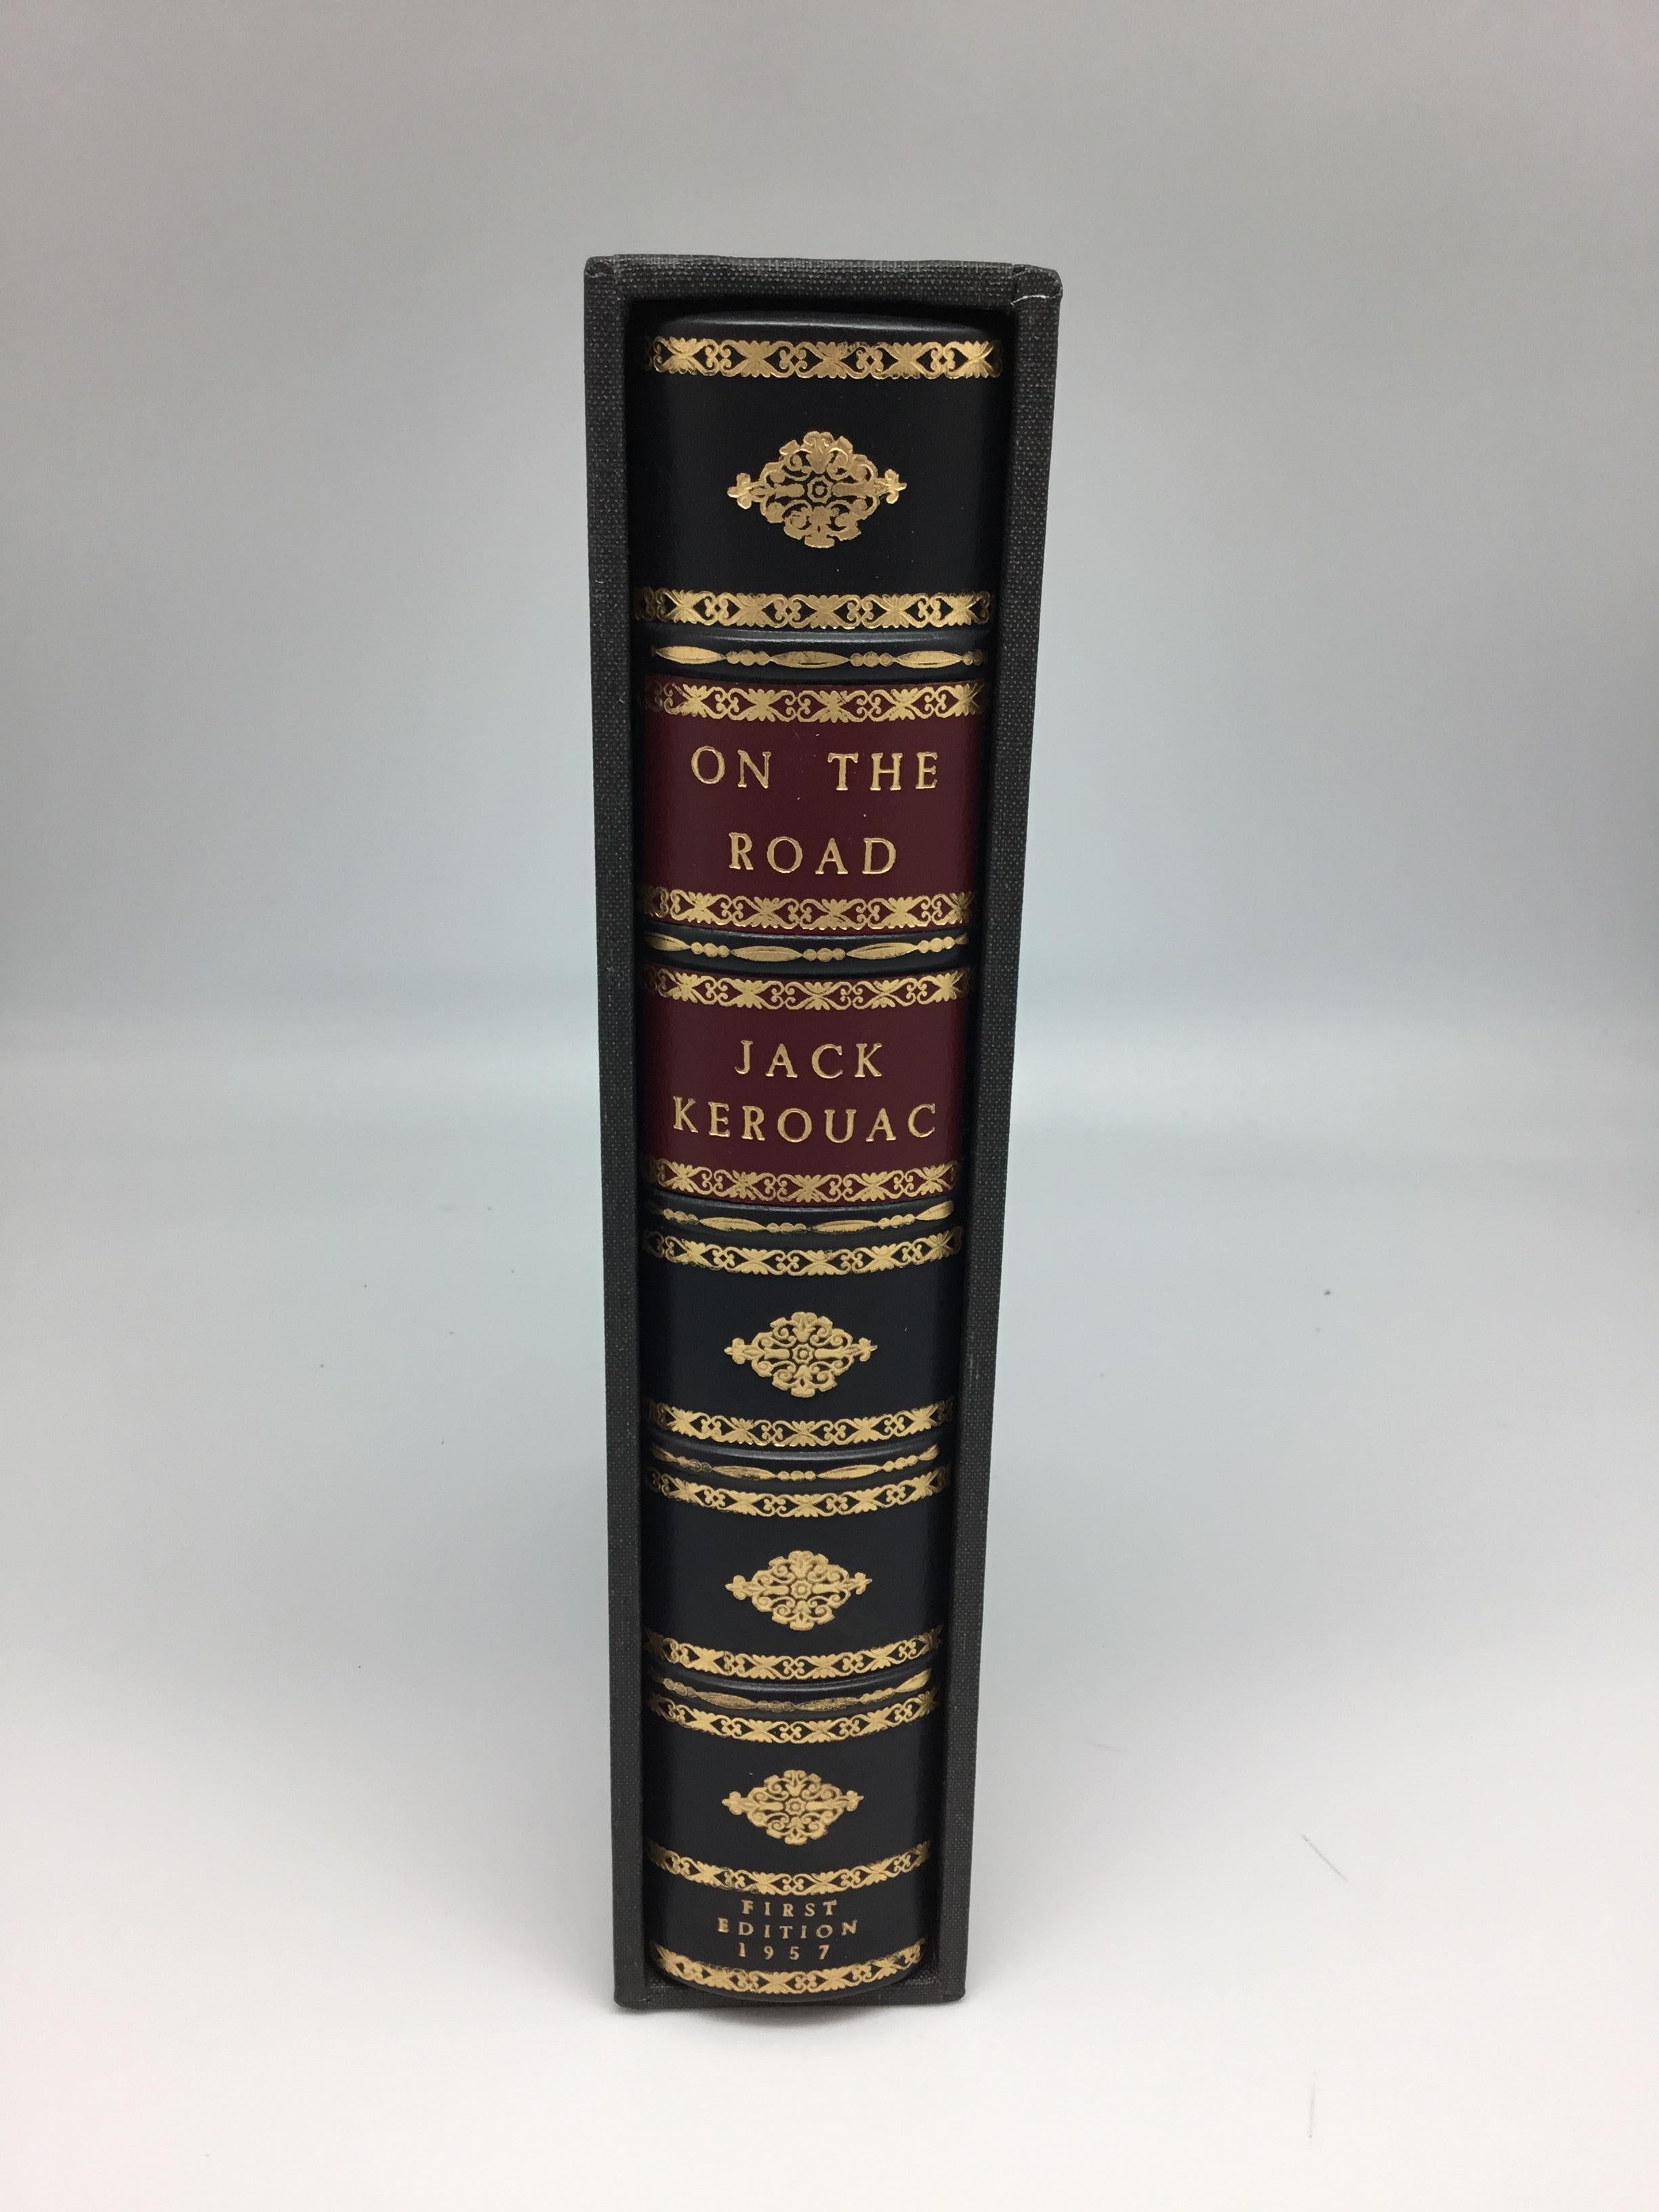 Kerouac, Jack, On the Road﻿. New York: The Viking Press, 1957. First edition, bound in quarter leather with matching cloth slipcase.

Presented is an original first edition copy of Kerouac’s second and most important novel, “a physical and